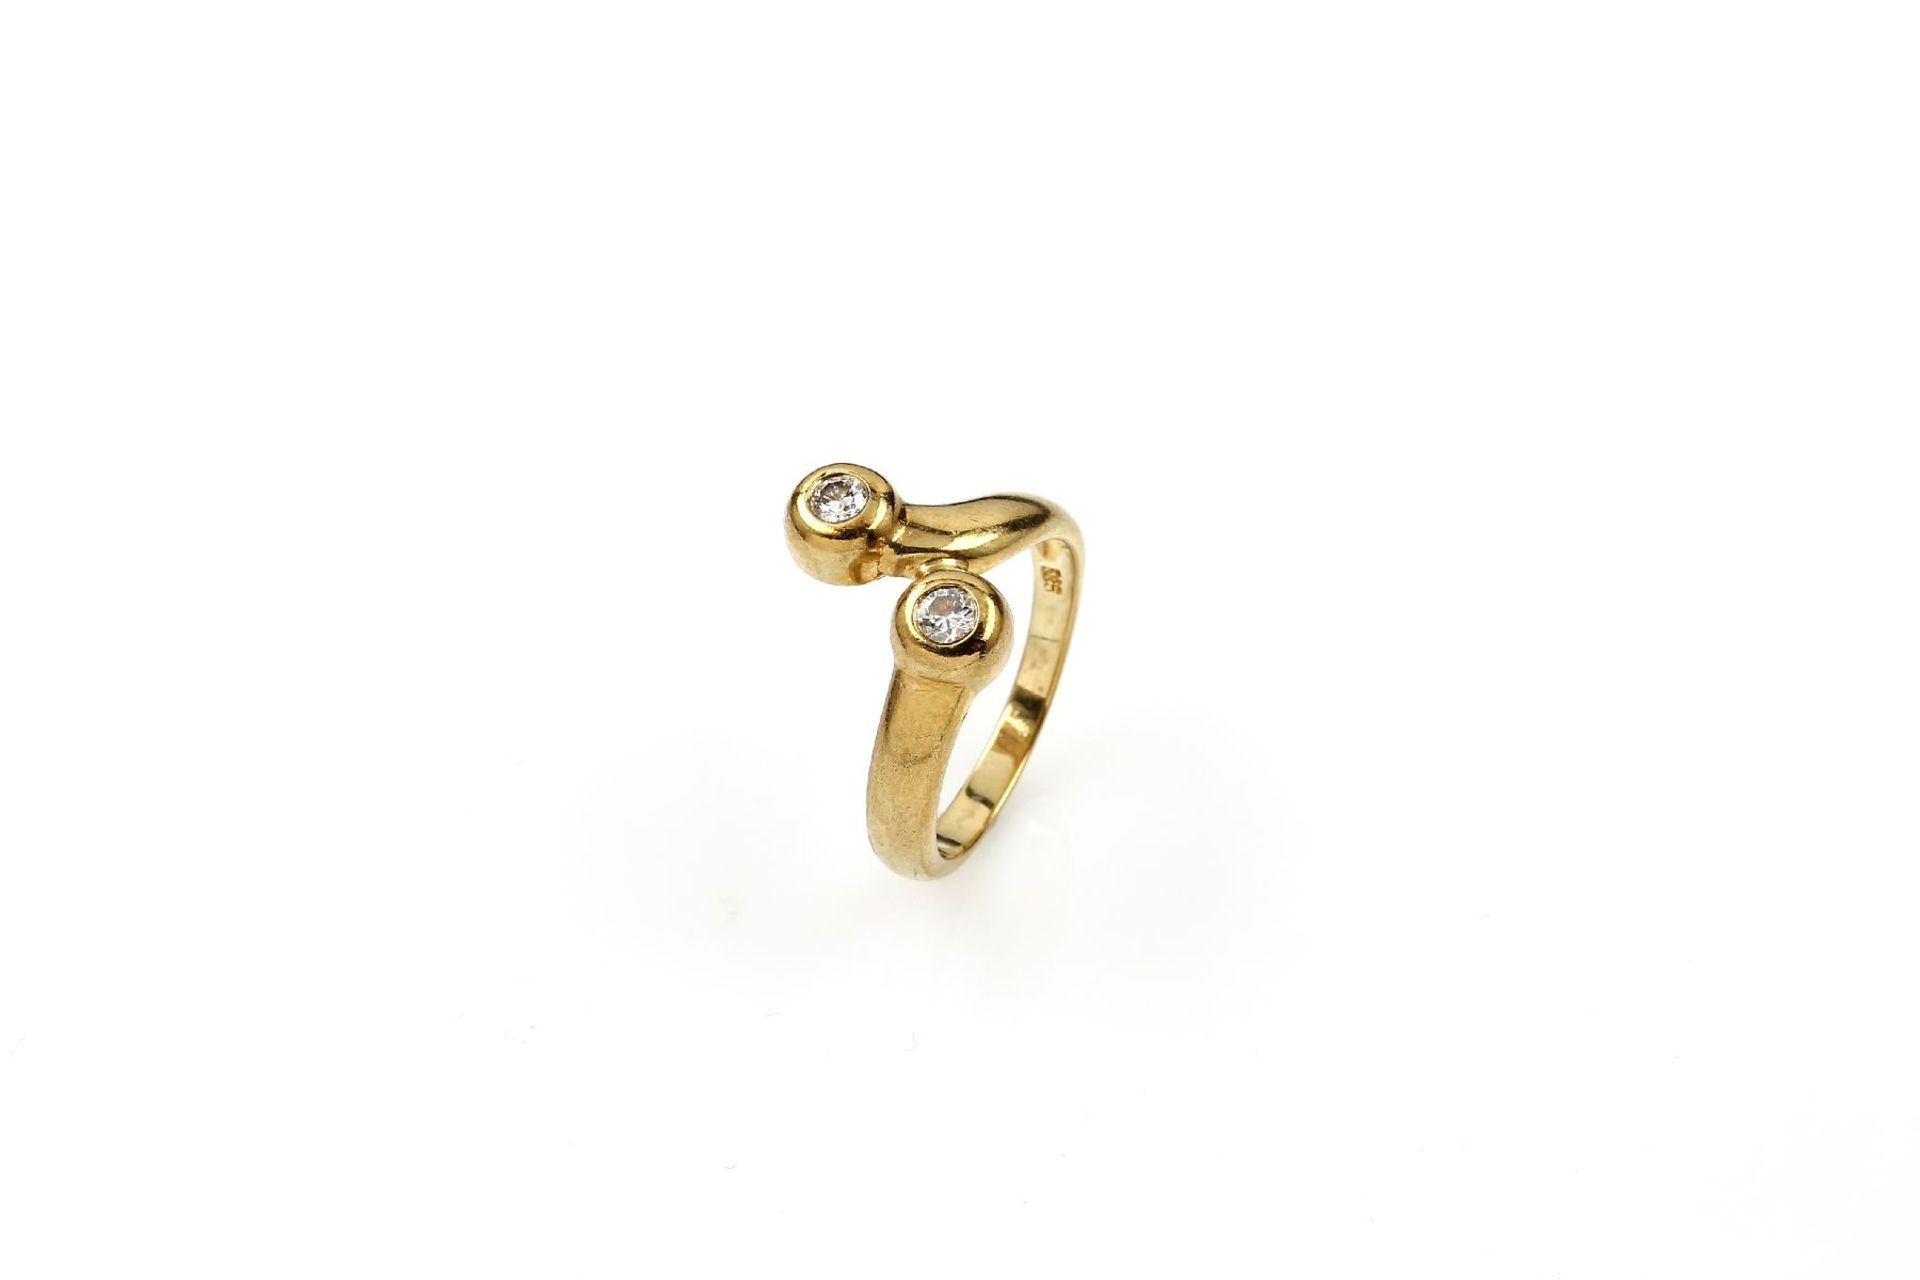 14 kt gold ring with brilliants , YG 585/000, asymm. splint, 2 brilliants total approx. 0.20 ct